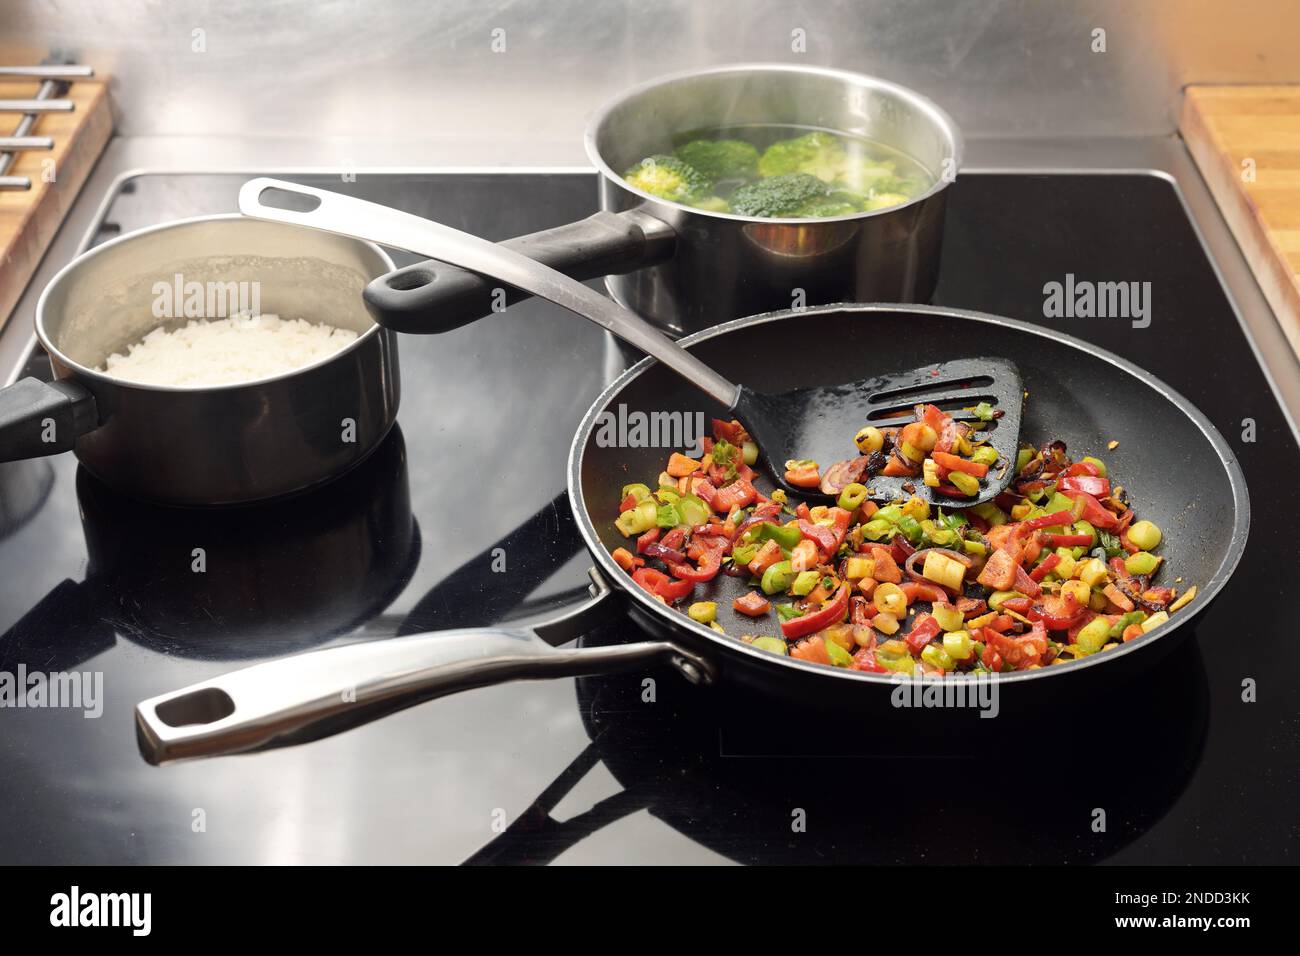 Diced vegetables are stir-fried with spices in a frying pan, pots with rice and broccoli behind them on the black stovetop, Asian style cooking, copy Stock Photo